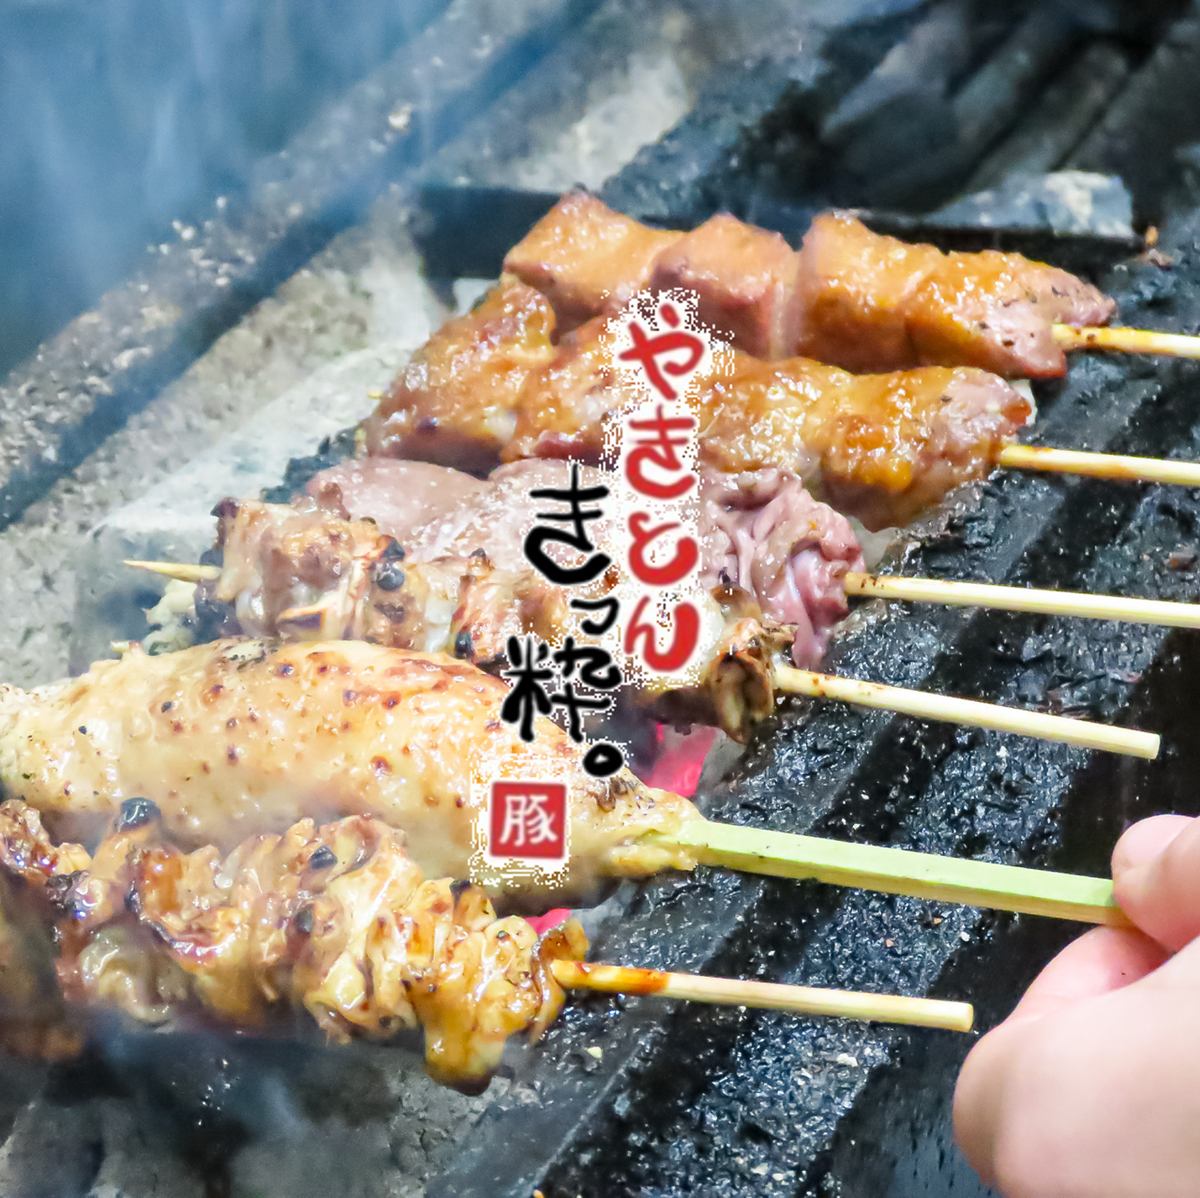 A popular bar that serves yakiton skewers with a secret miso sauce and a wide variety of other specialties and smoked meats!